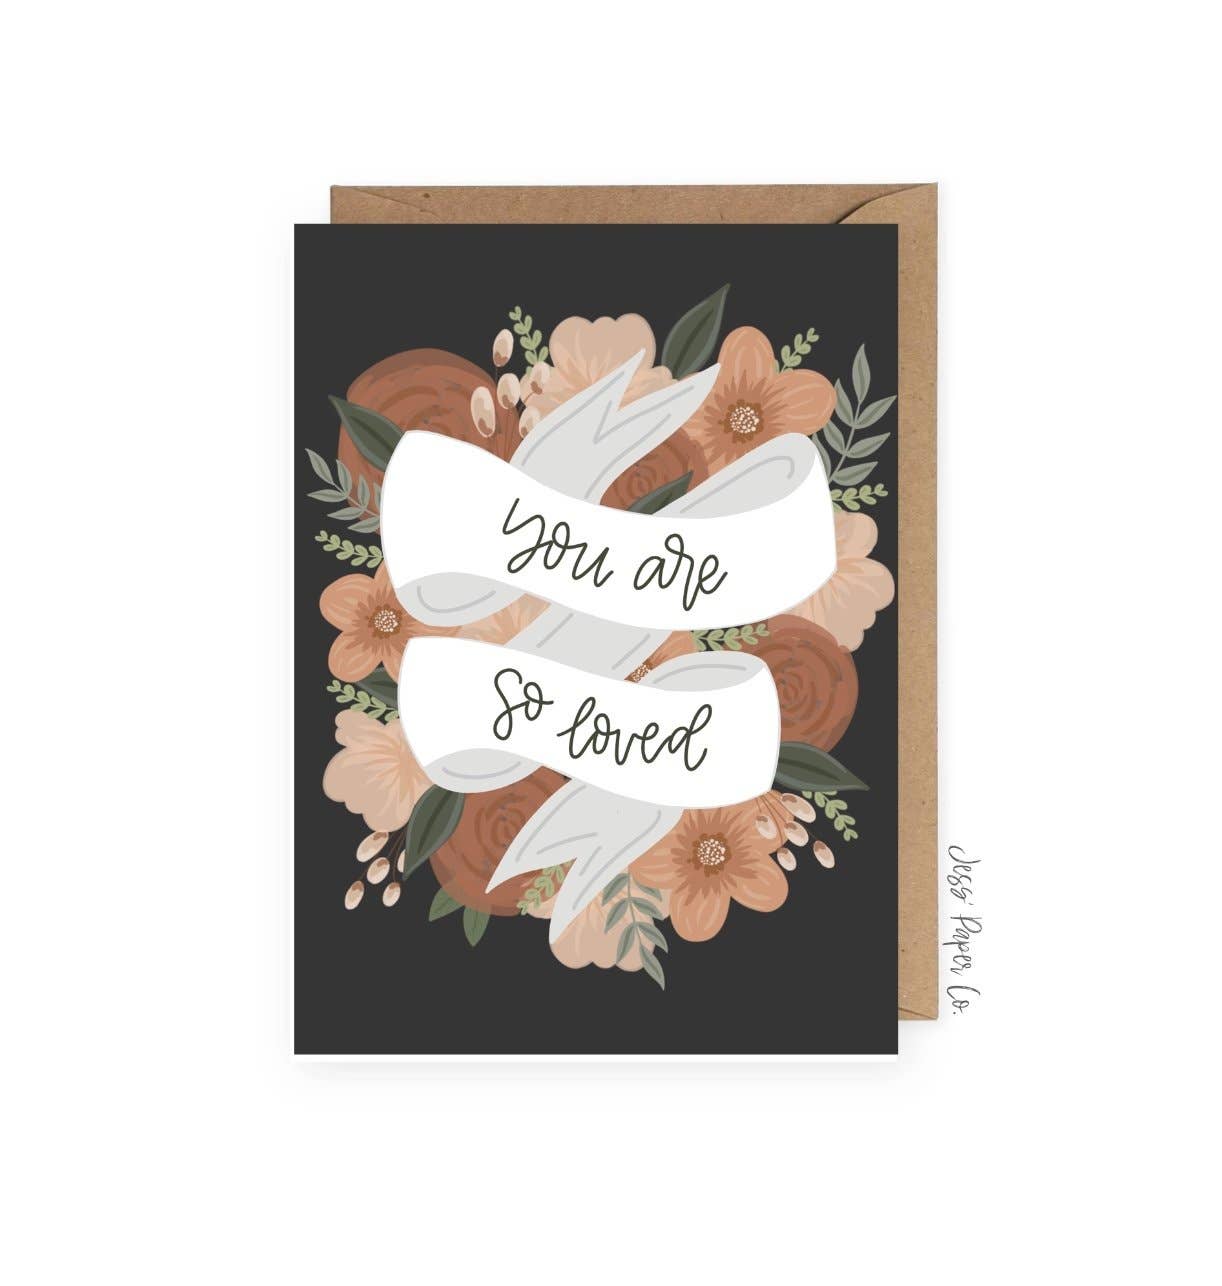 Jess's Paper Co: Greeting Card - "You are So Loved"